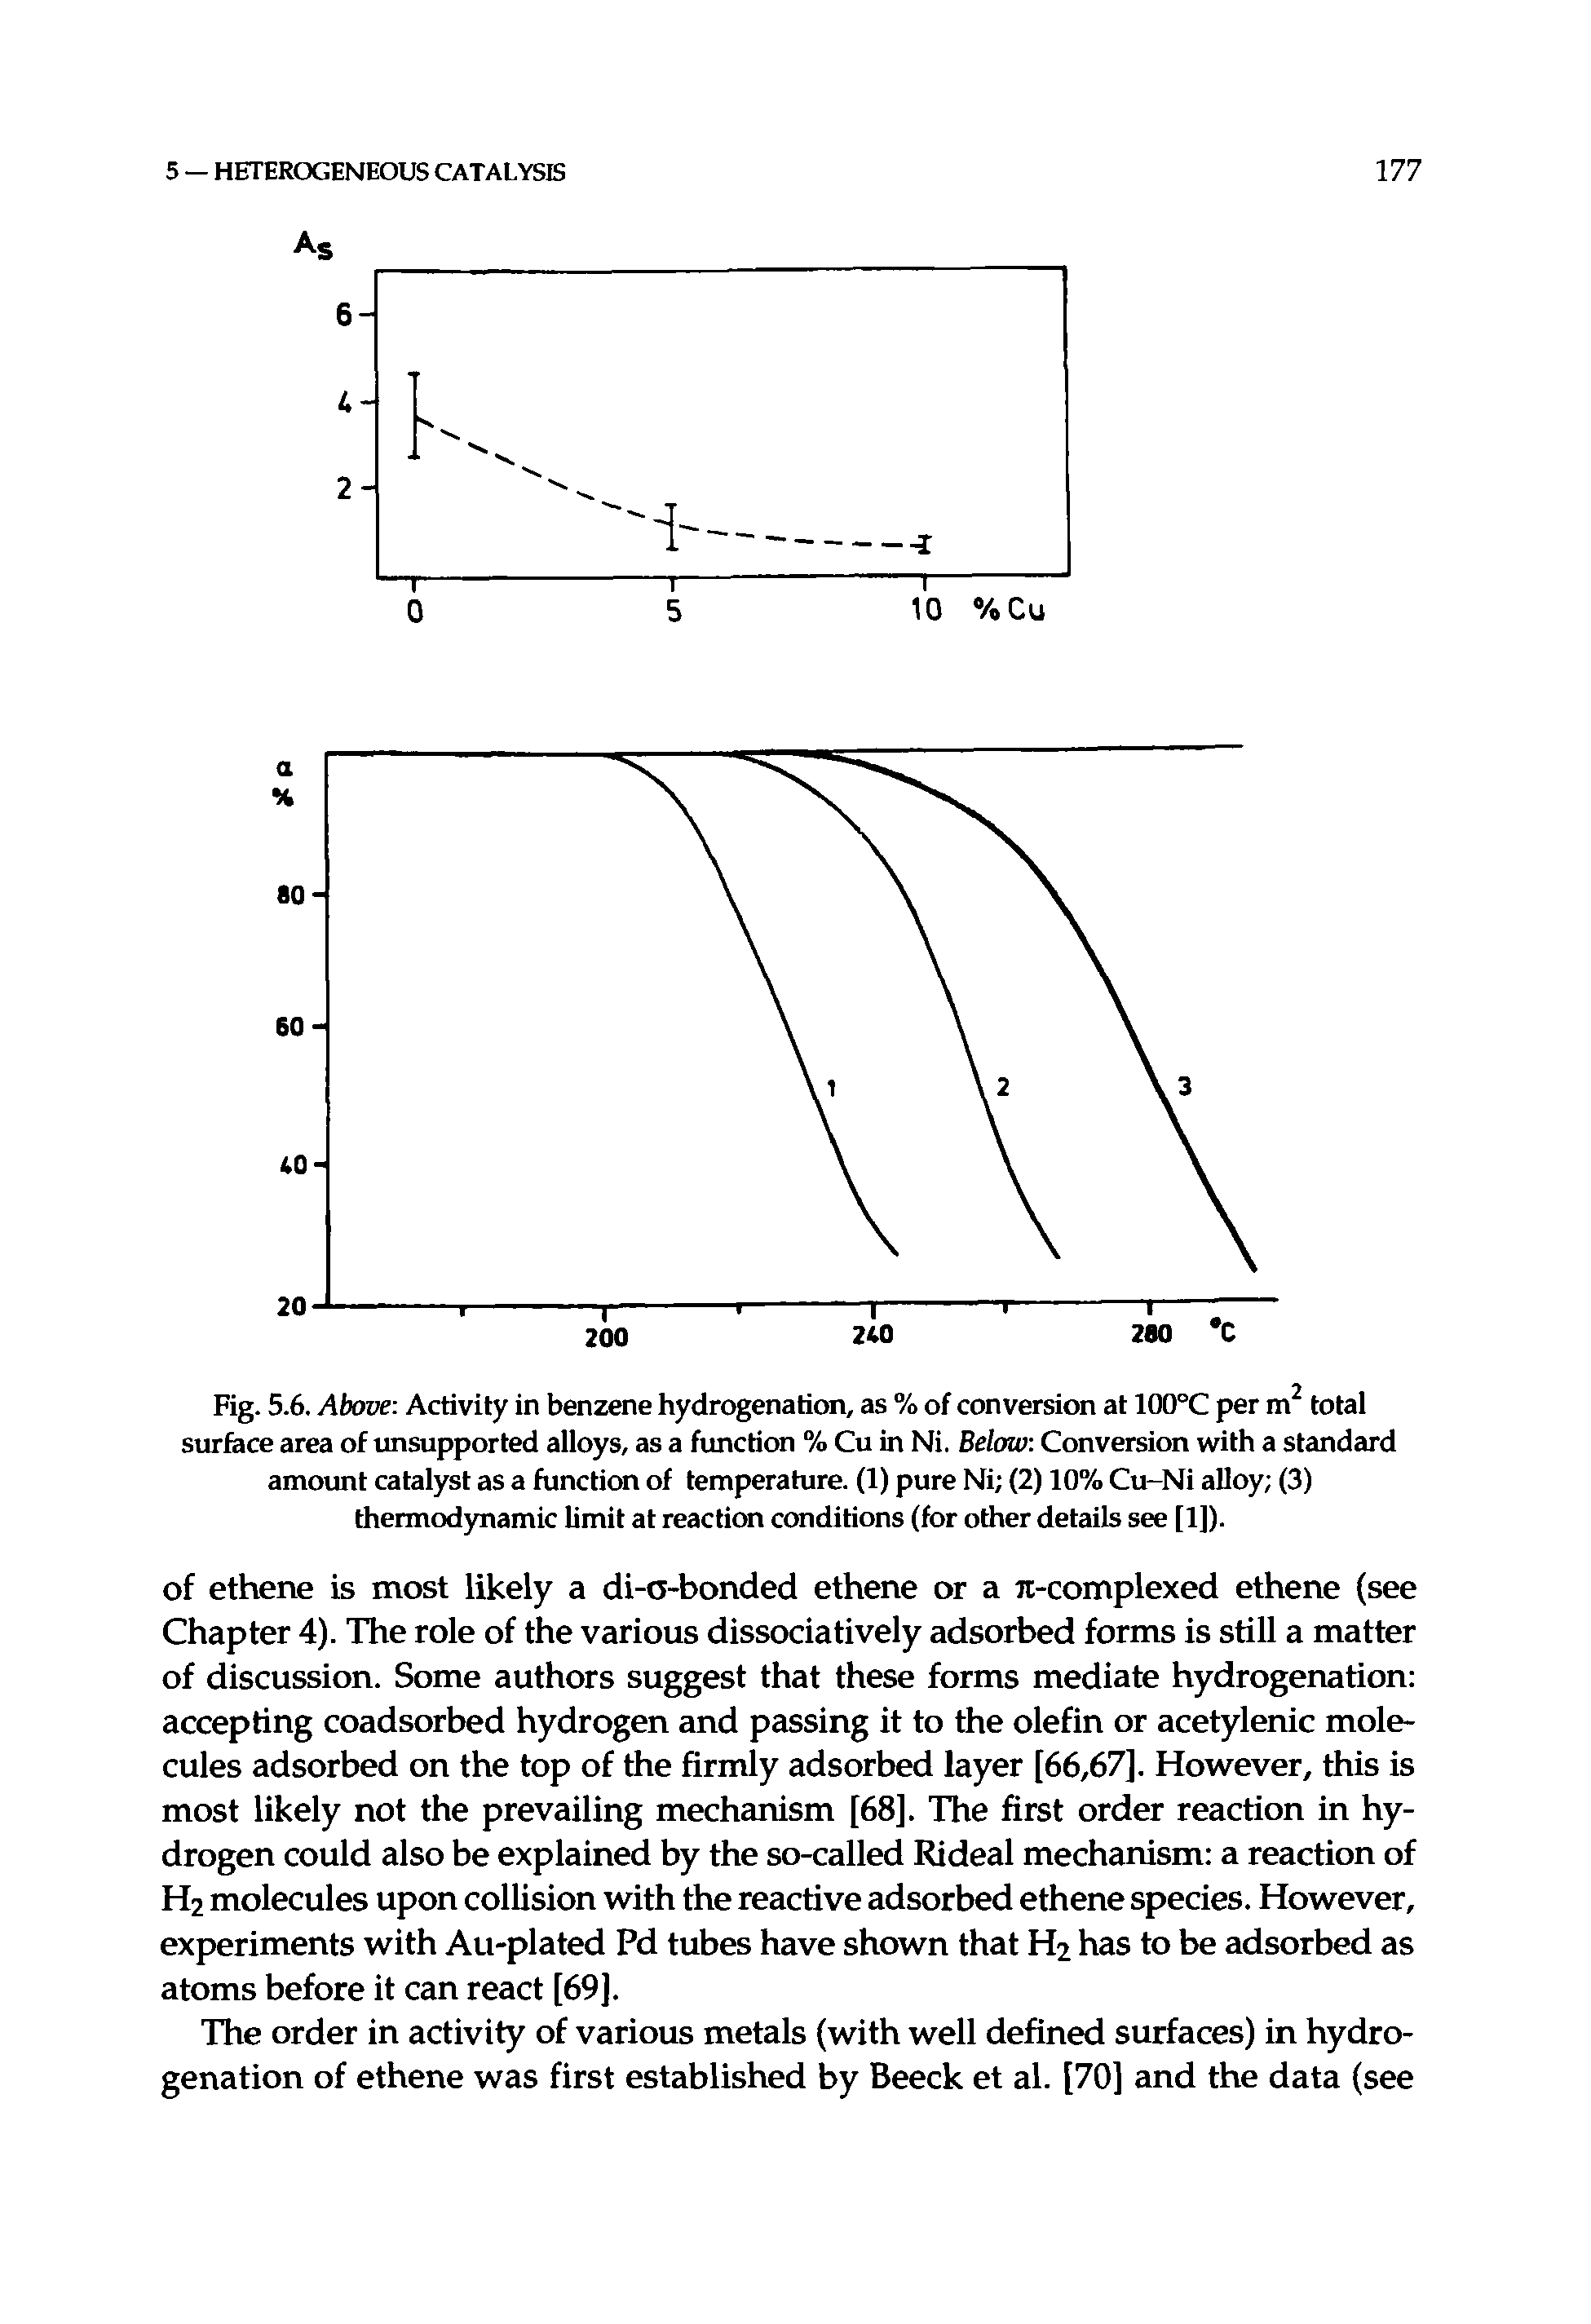 Fig. 5.6. Above Activity in benzene hydrogenation, as % of conversion at 100°C per m2 total surface area of unsupported alloys, as a function % Cu in Ni. Below Conversion with a standard amount catalyst as a function of temperature. (1) pure Ni (2) 10% Cu-Ni alloy (3) thermodynamic limit at reaction conditions (for other details see [1]).